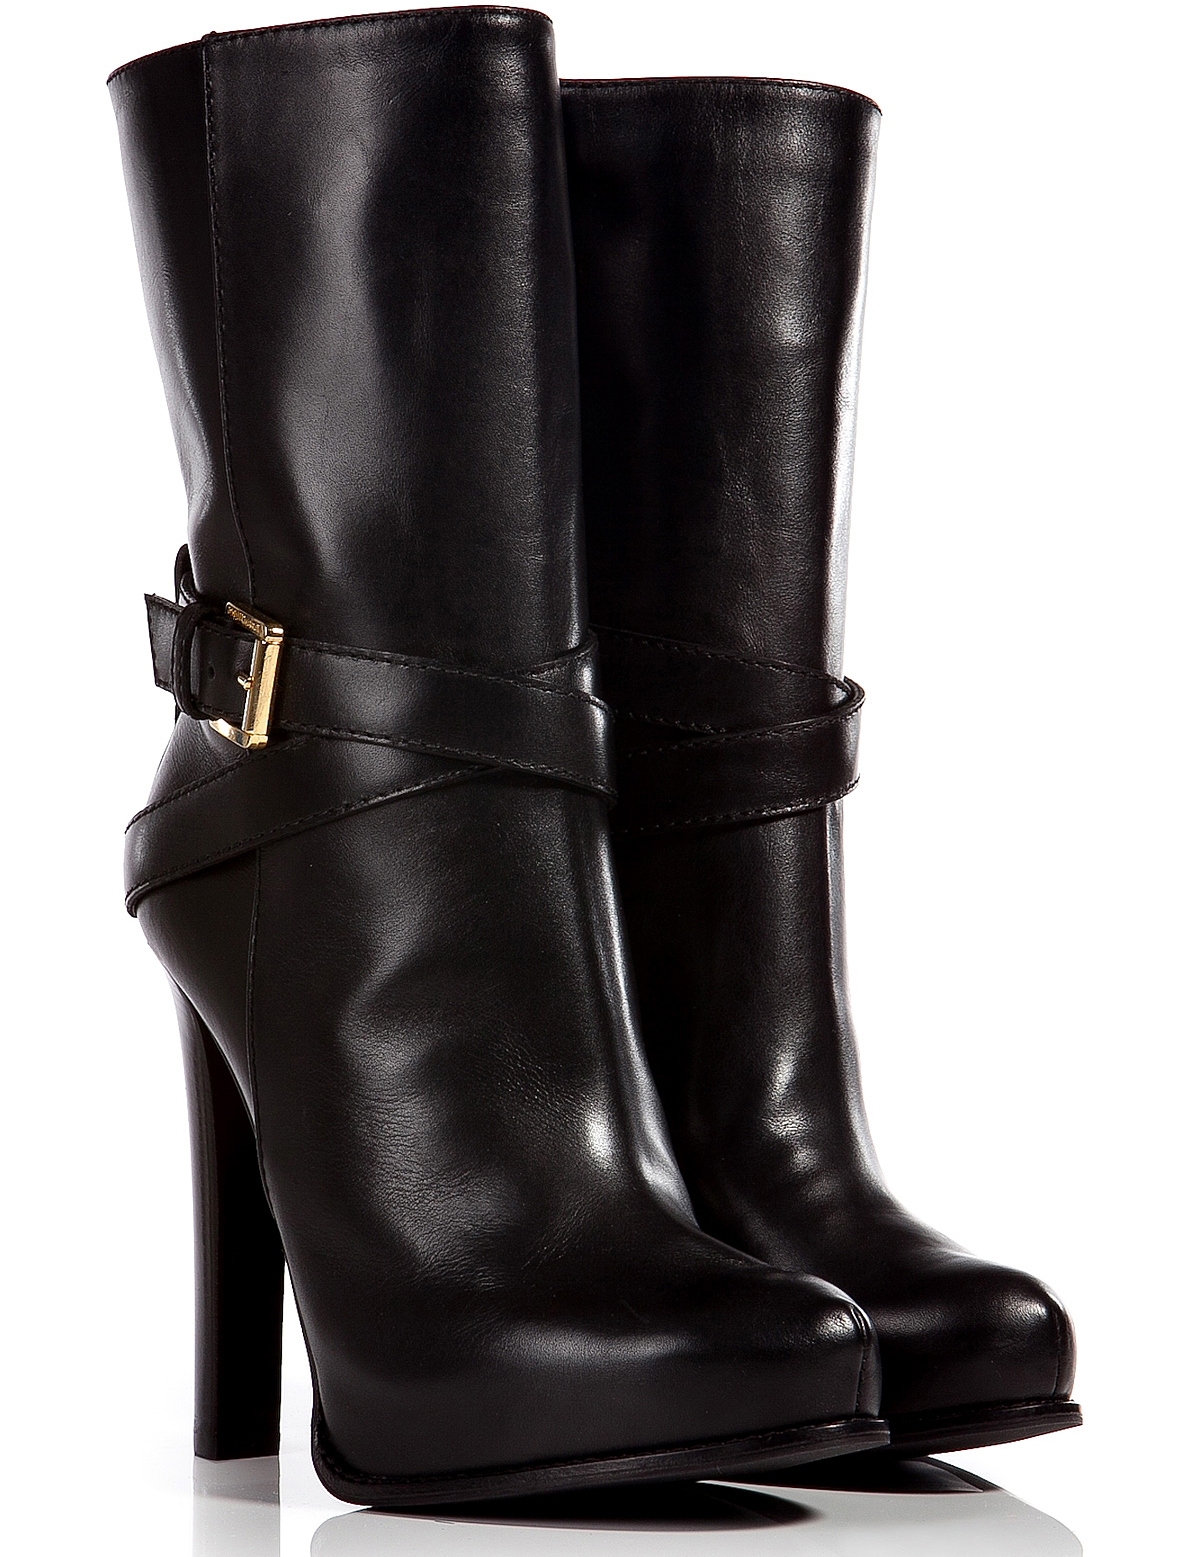 DSQUARED2 black leather ankle boots